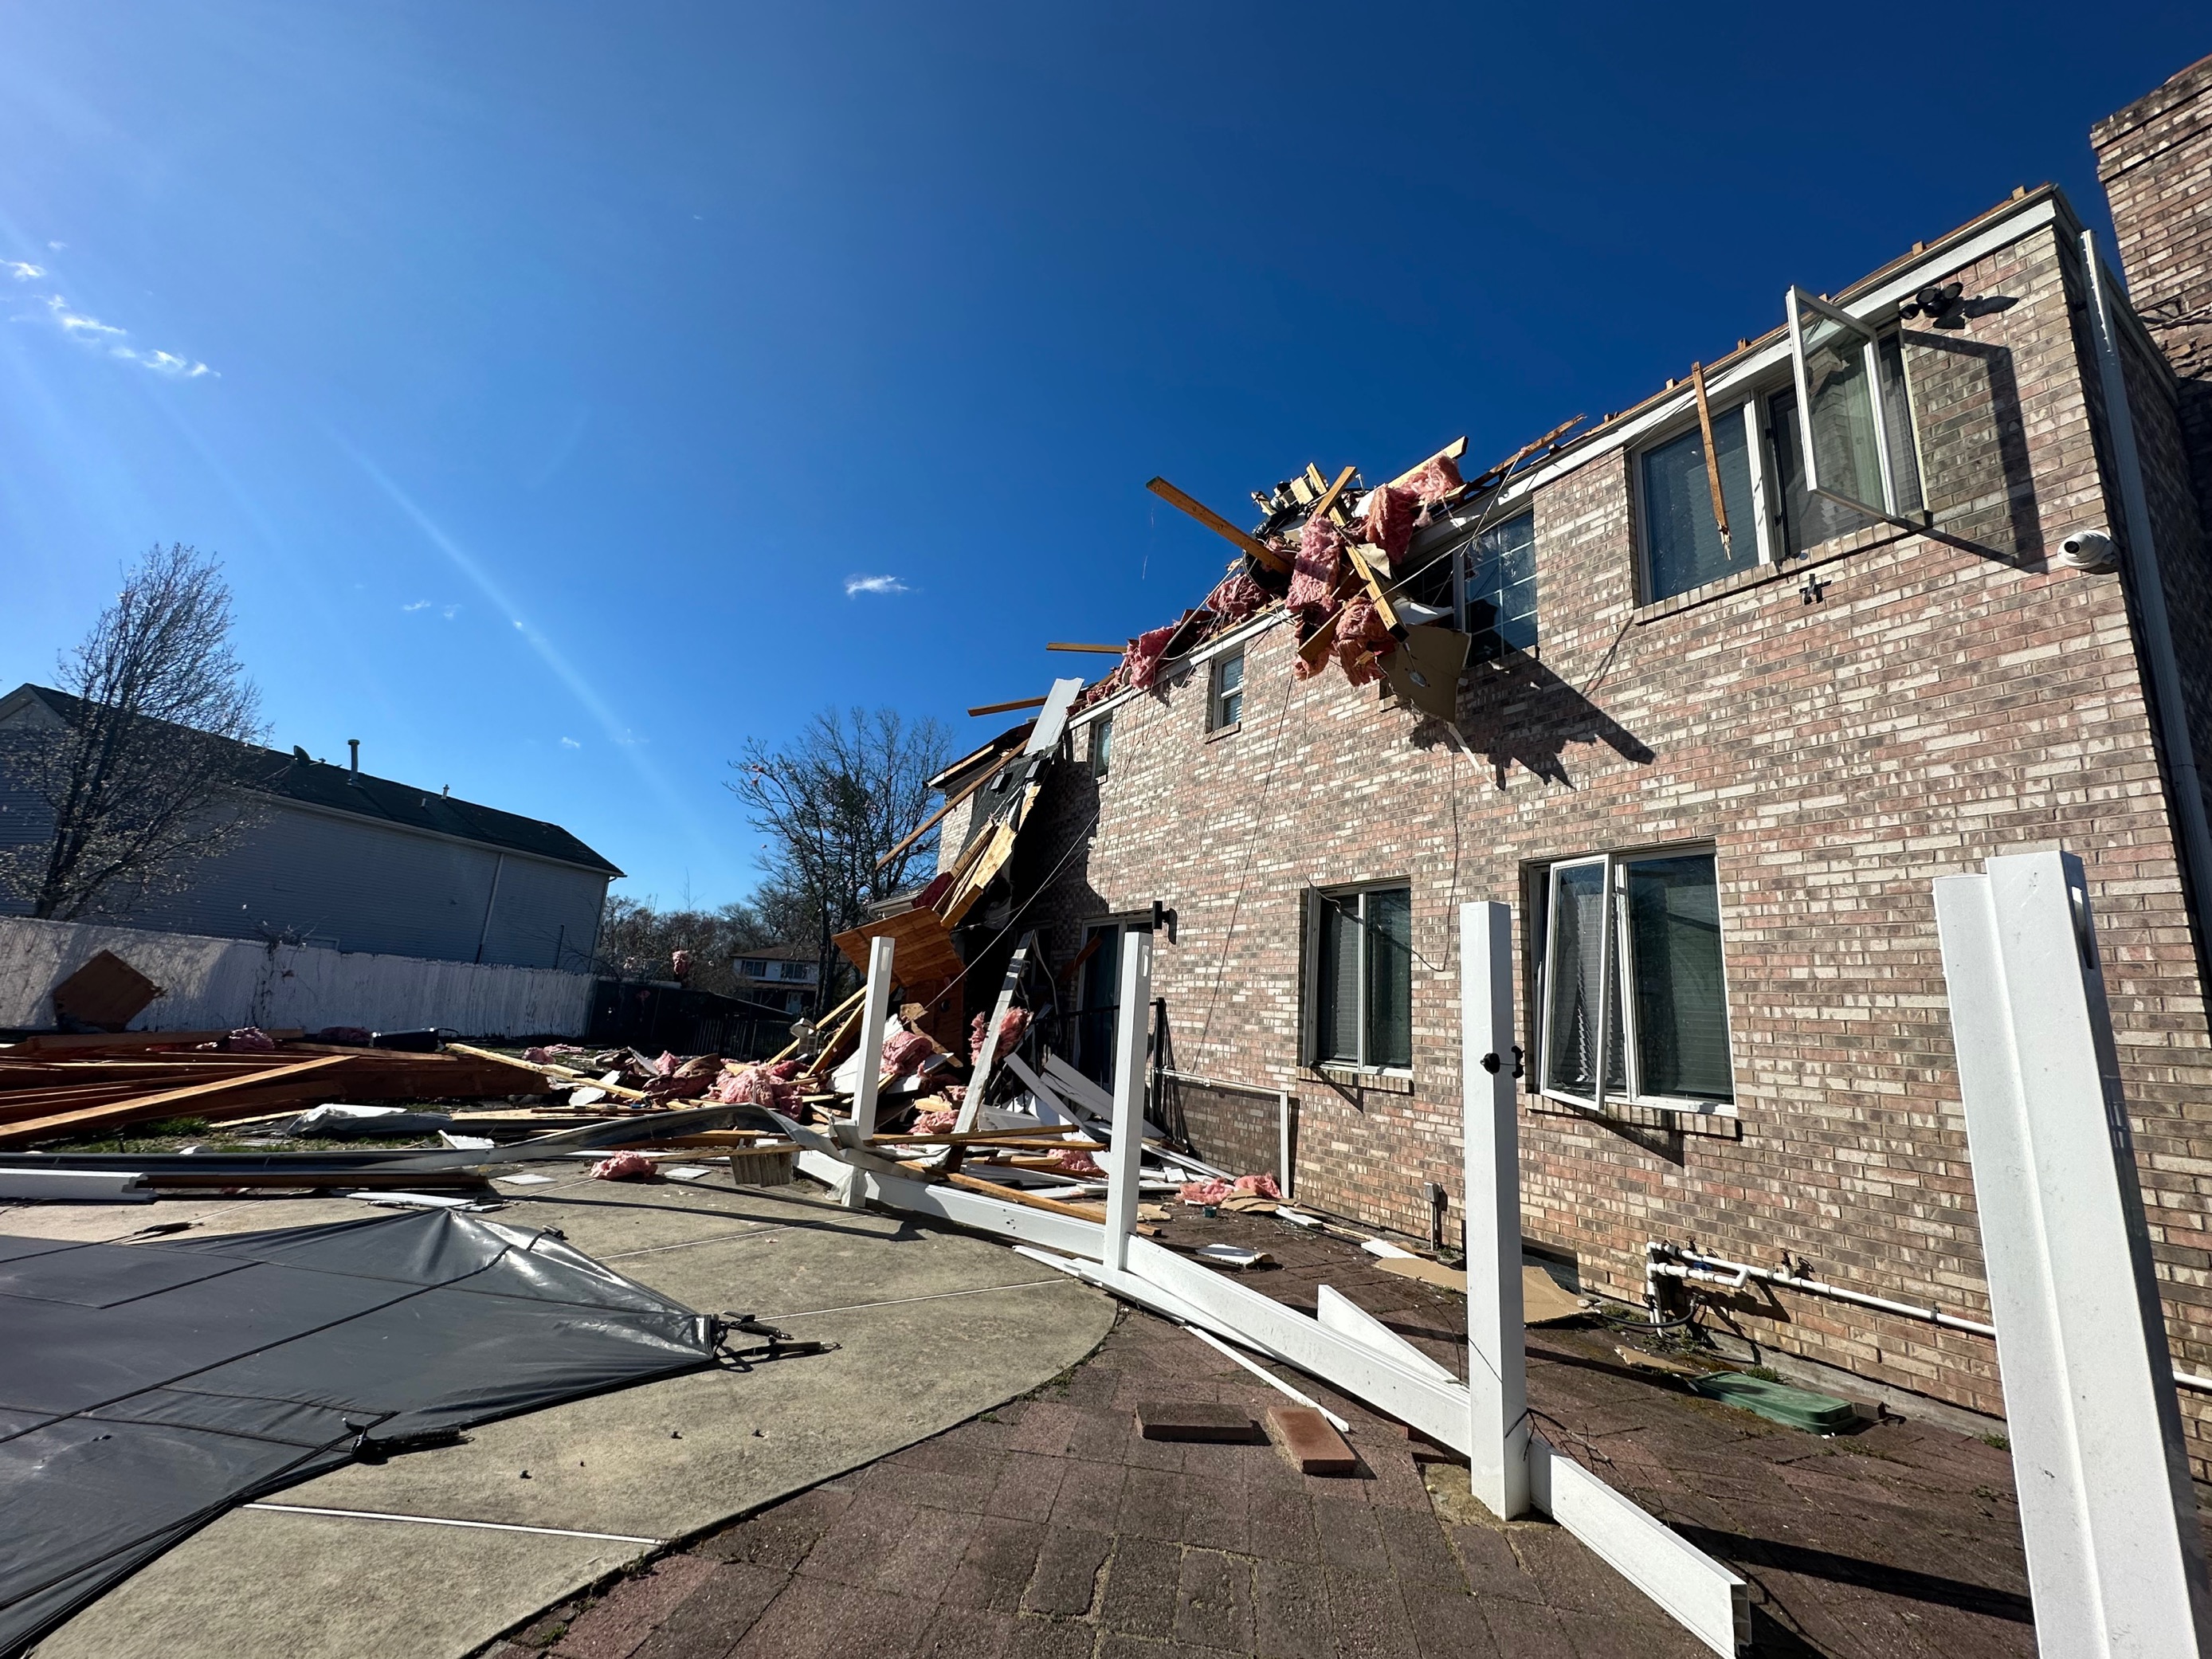 National Weather Service confirms multiple tornadoes formed in New Jersey